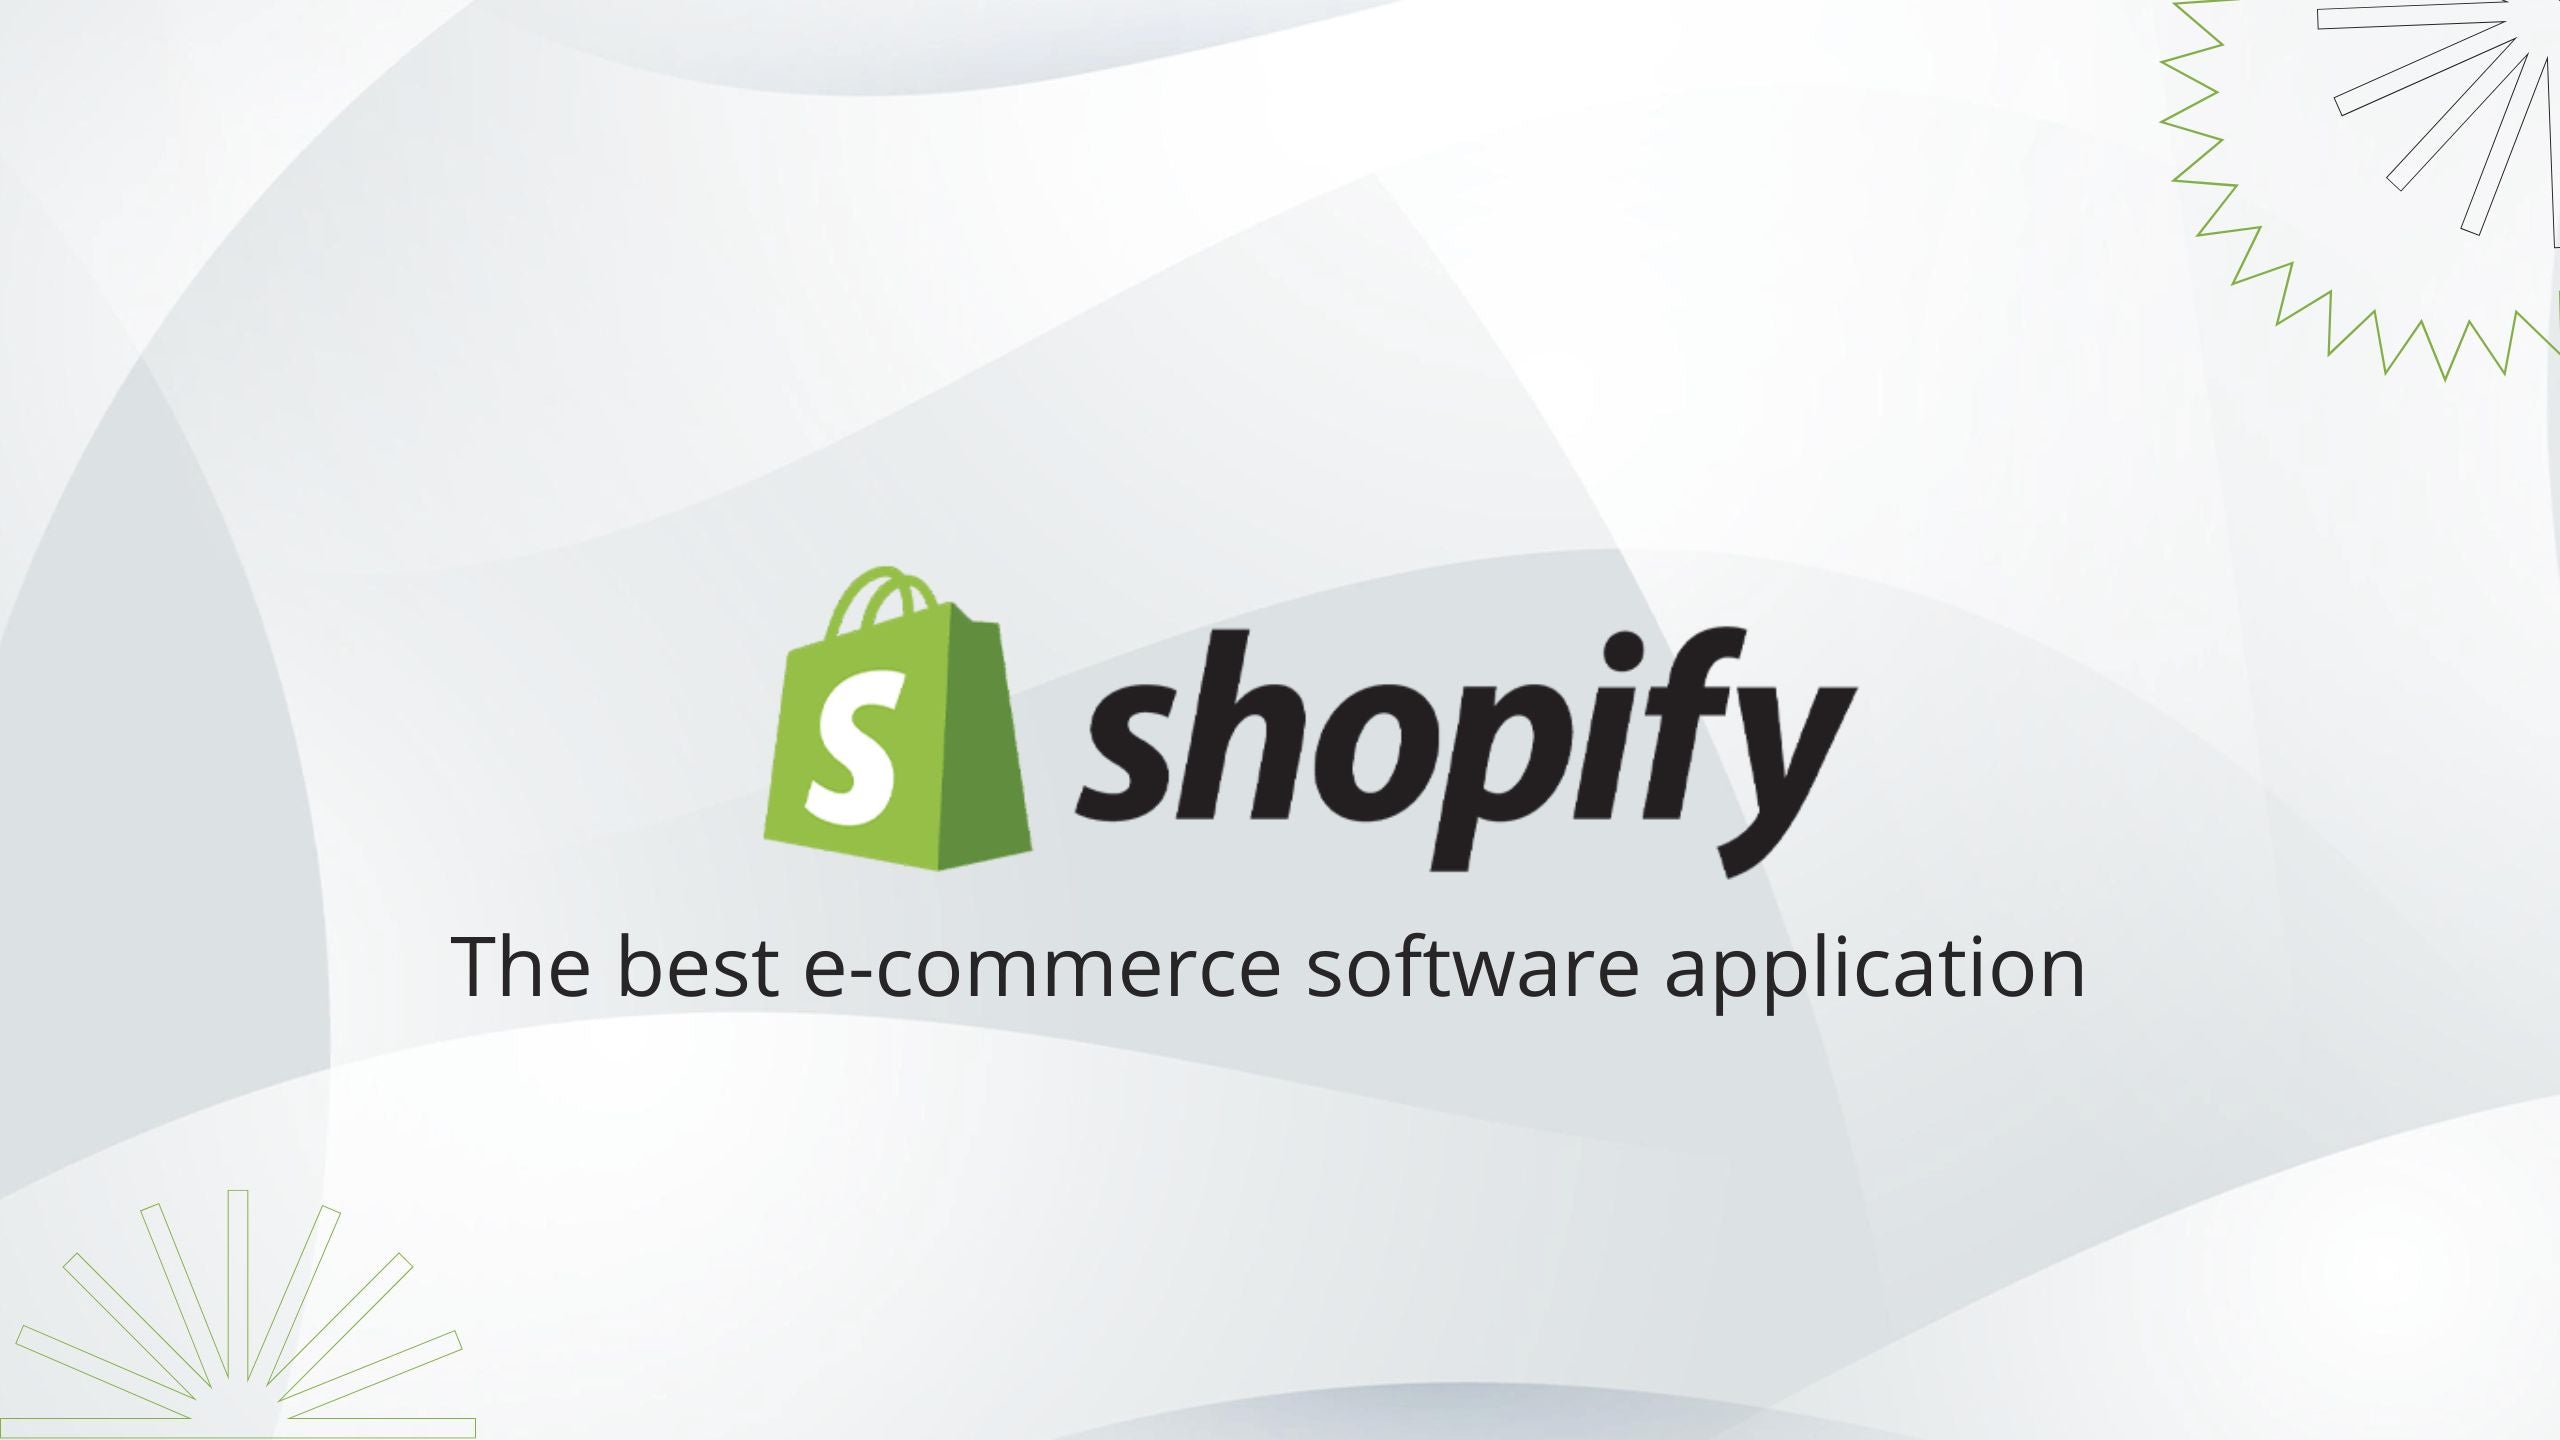 What is the best e-commerce software application in Shopify?